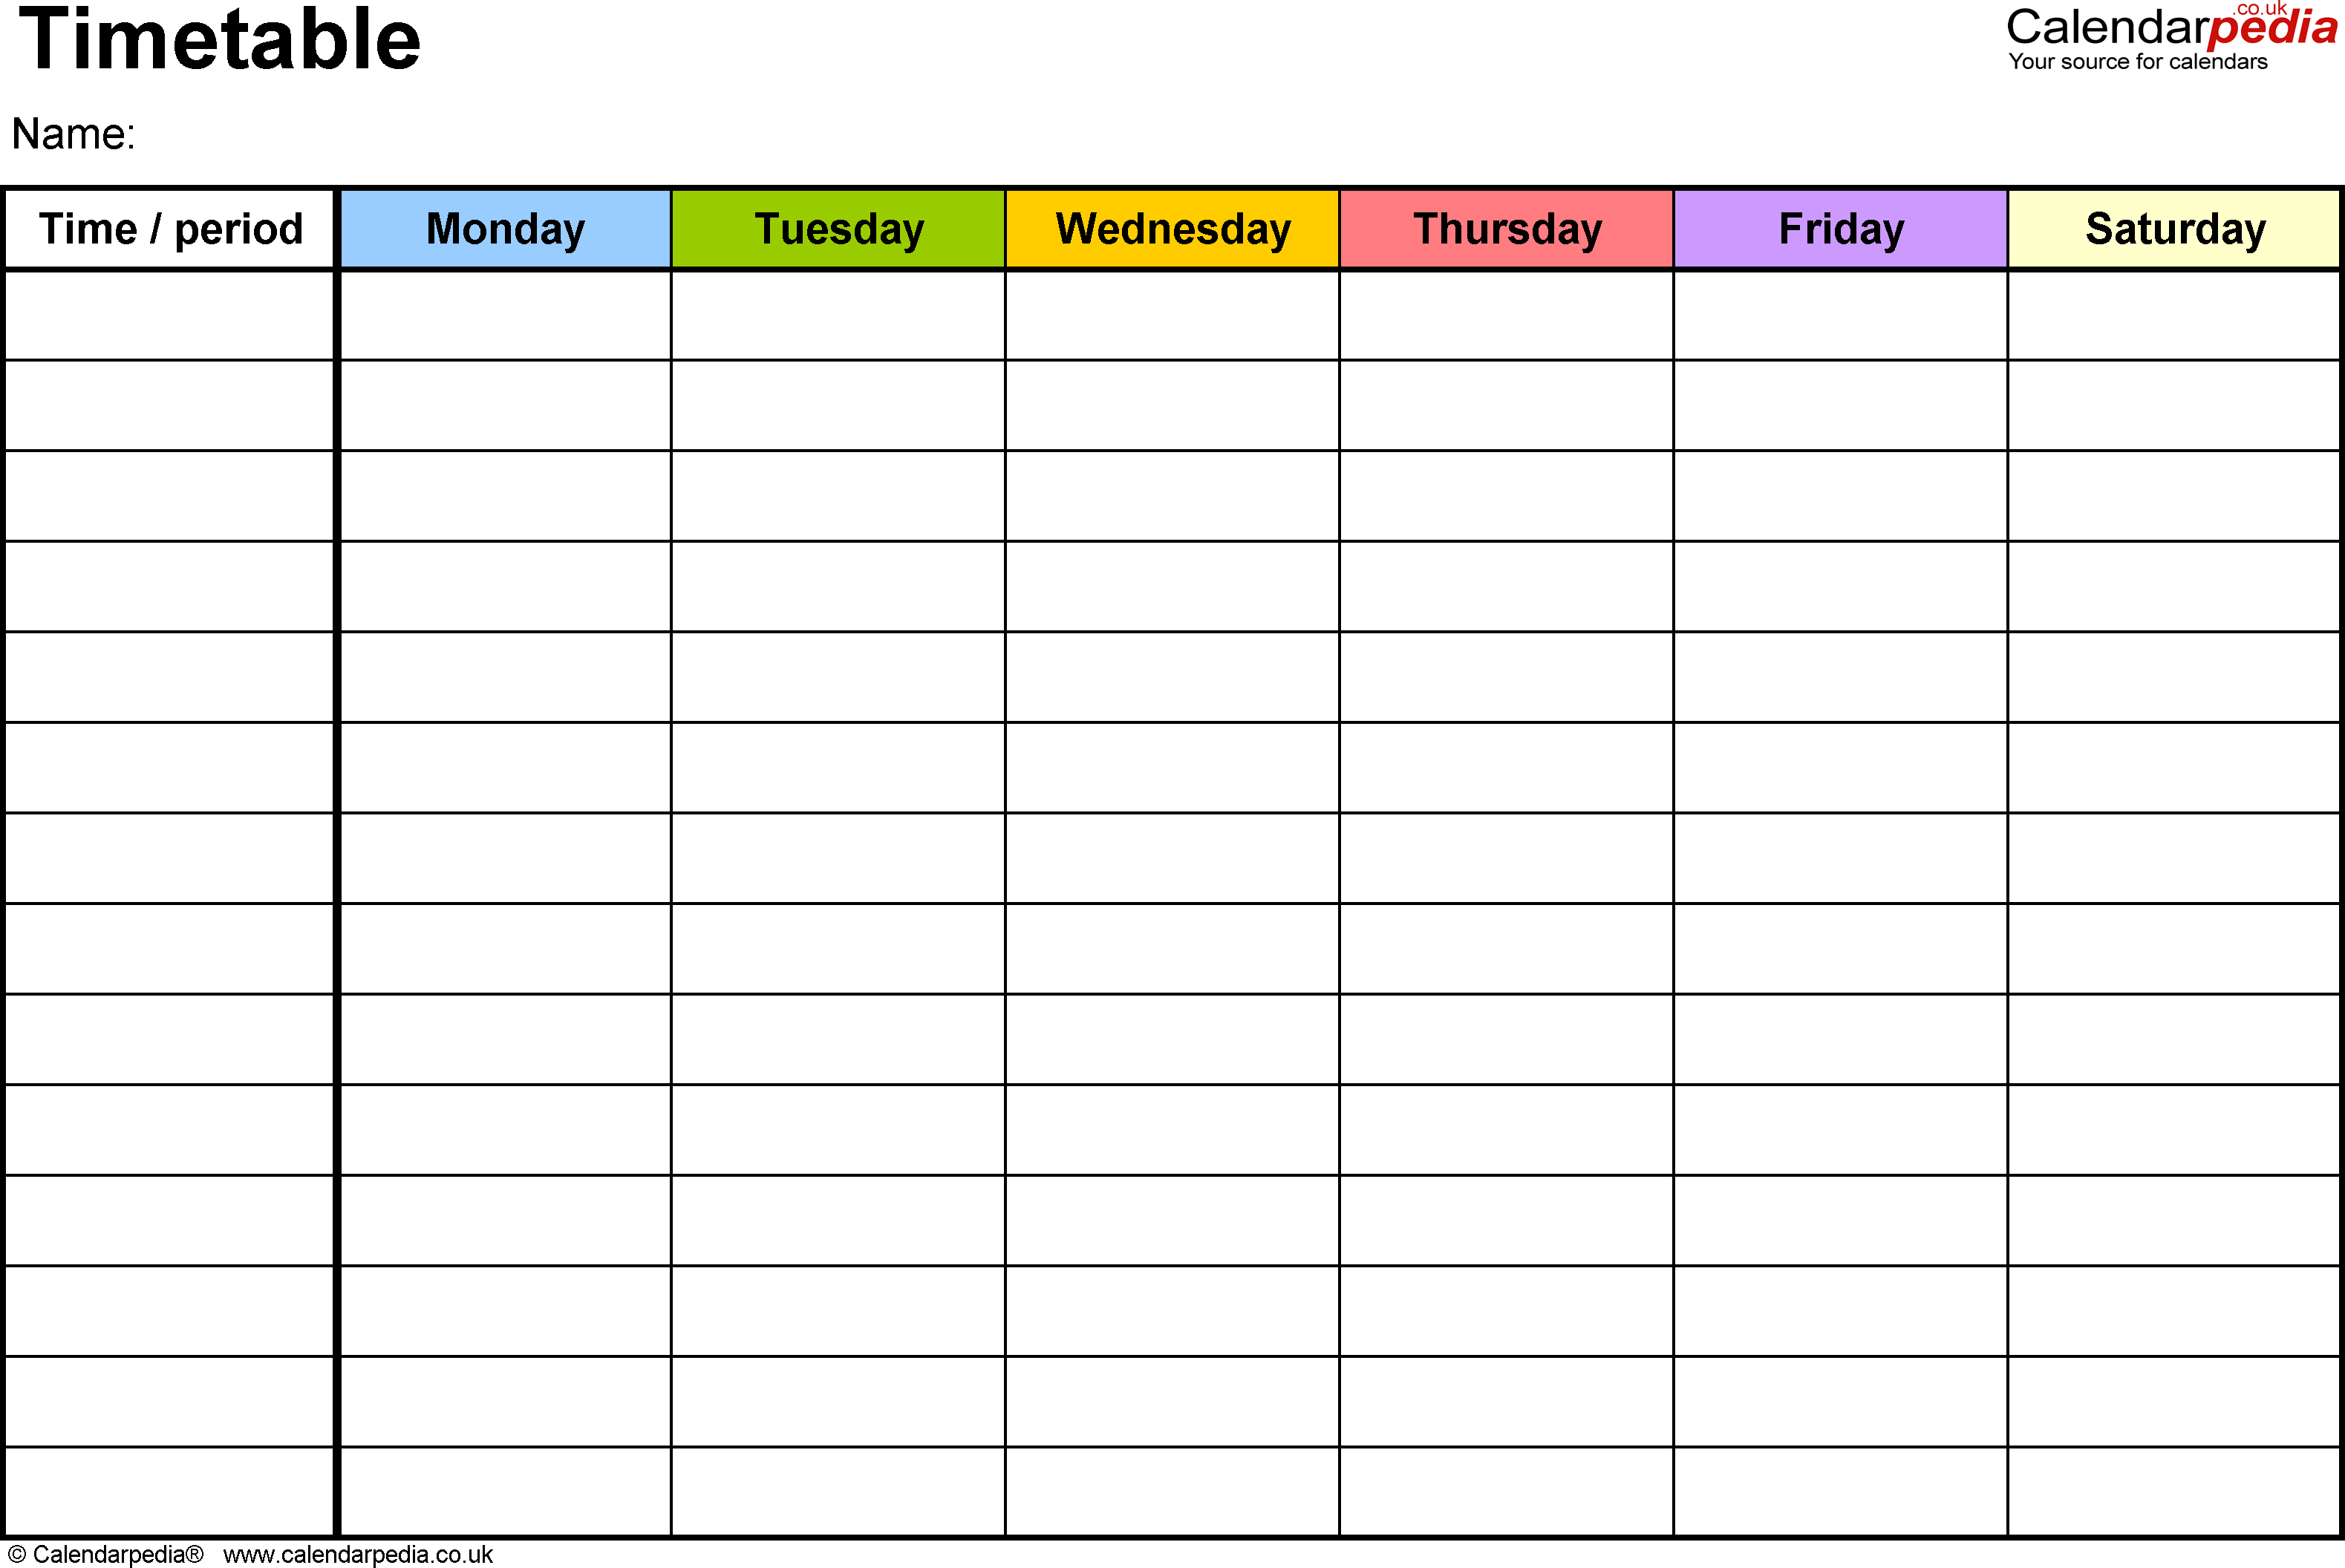 Timetable templates for Microsoft Word - free and printable Throughout Blank Revision Timetable Template